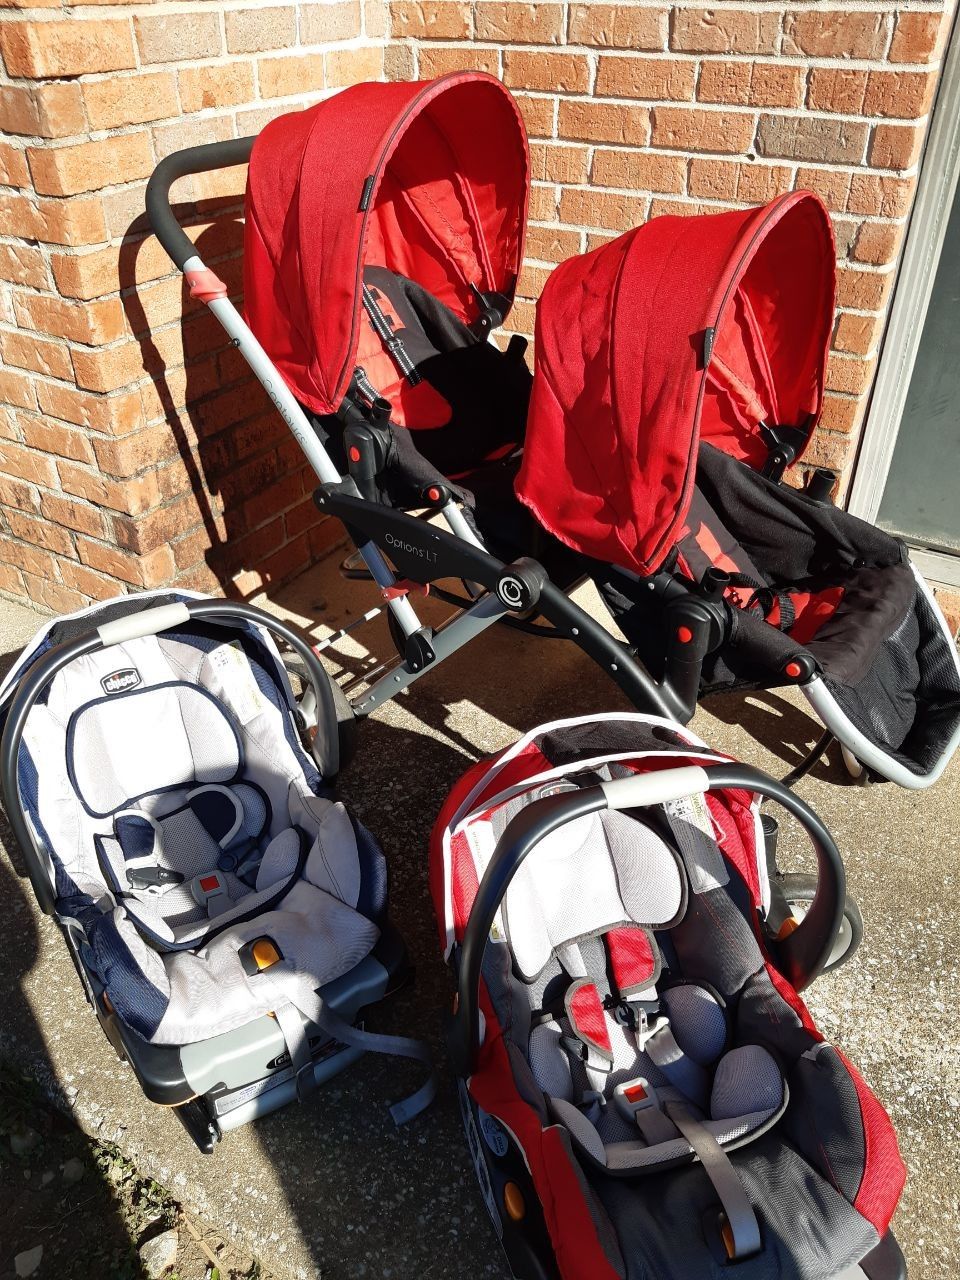 Twin's baby stroller